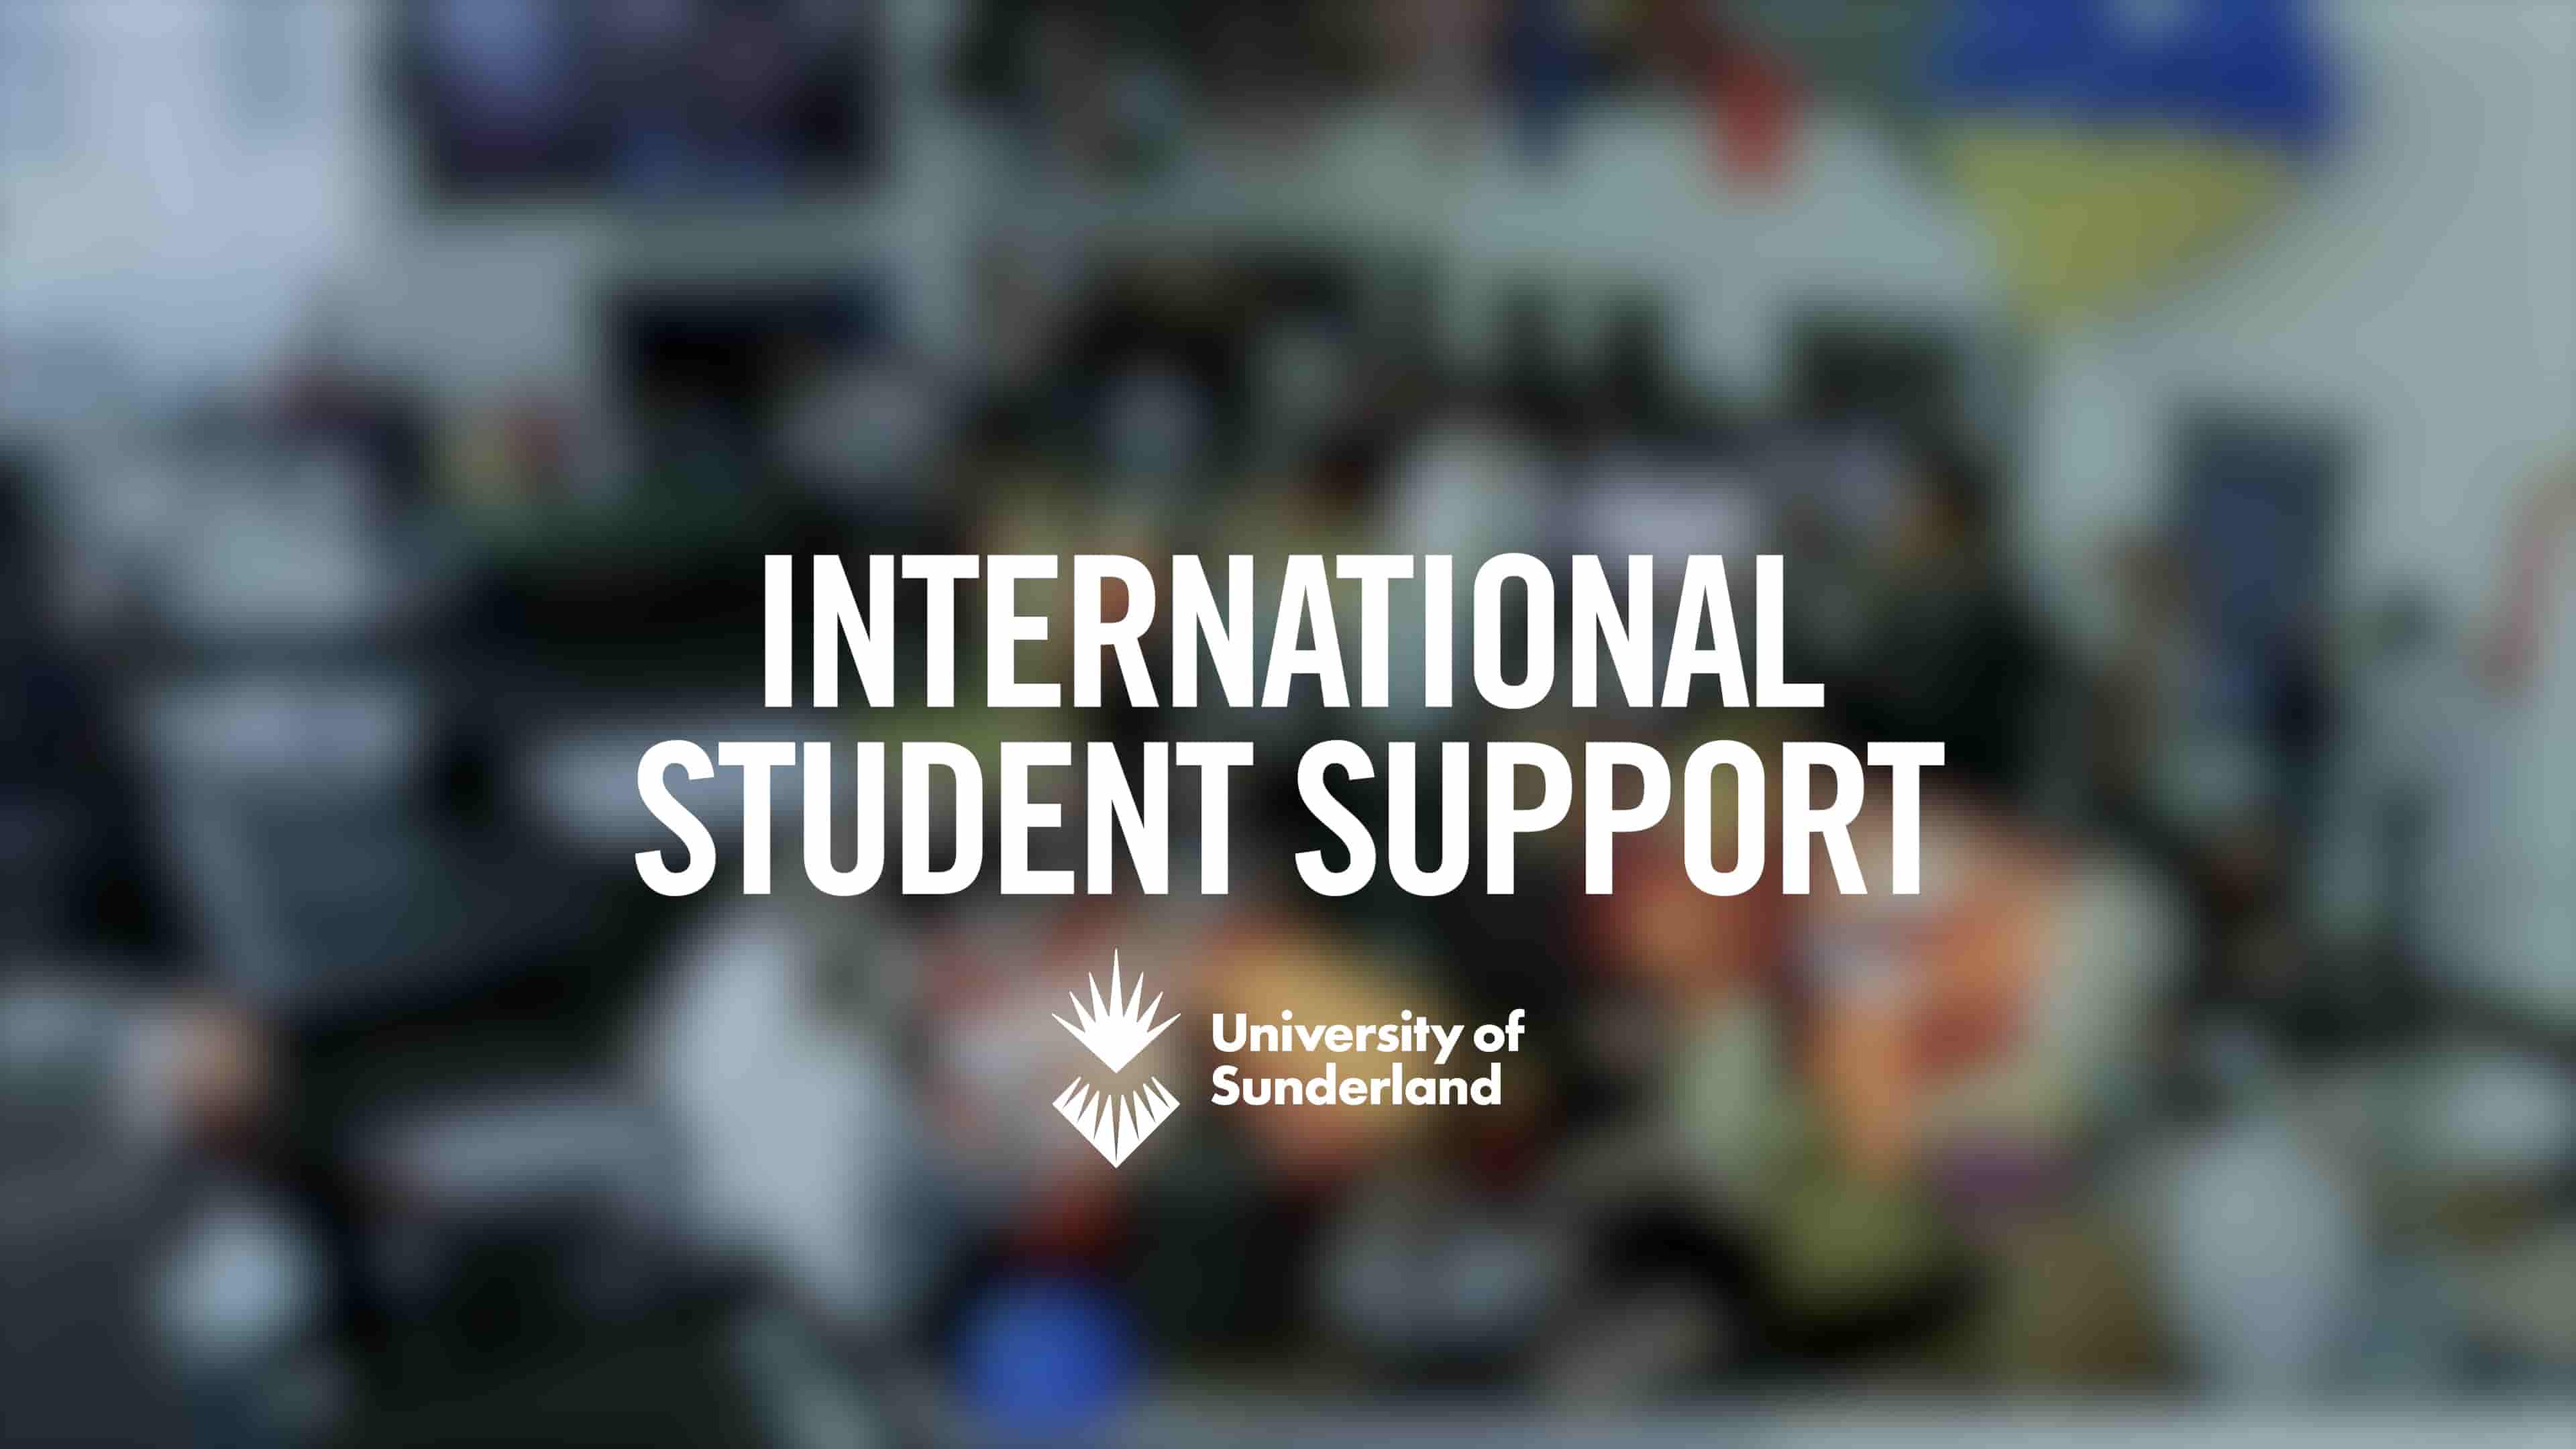 A blurred image with international student support written on it and the University of Sunderland logo